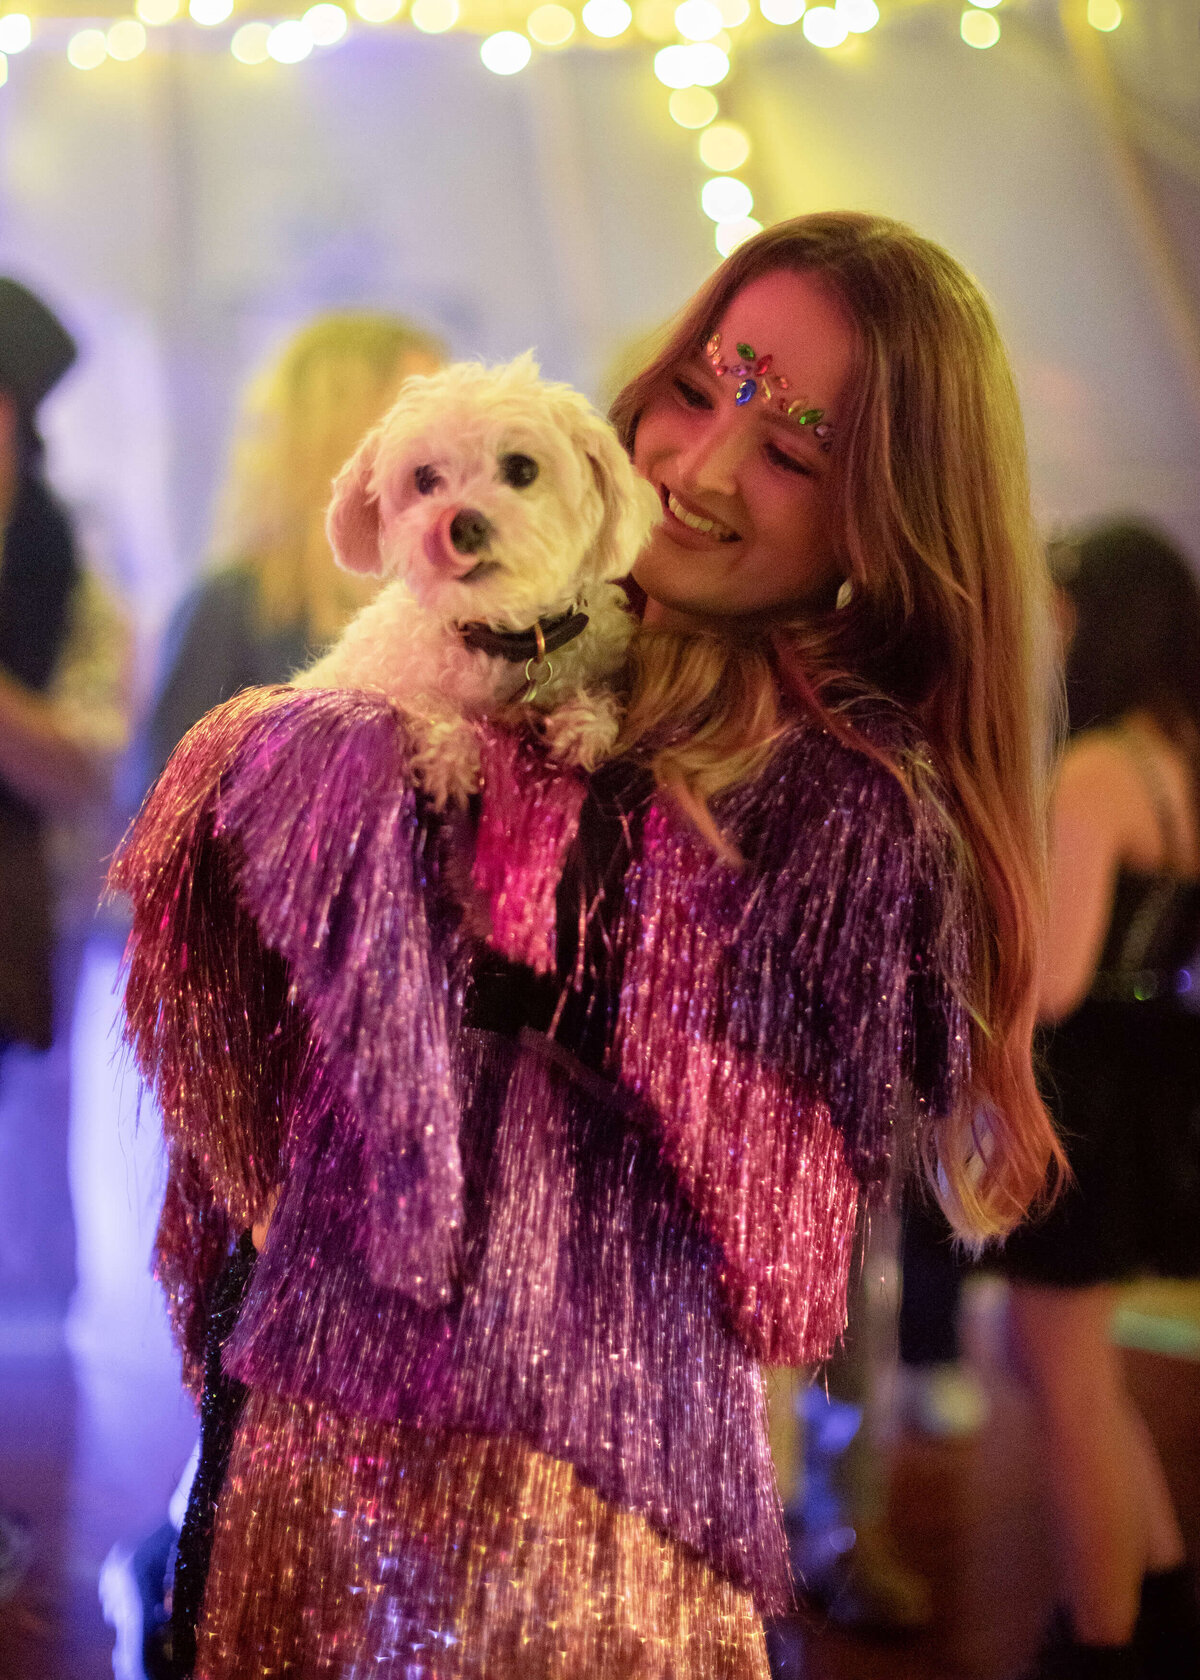 events-birthday-party-gsp-festival-costume-sequins-dog